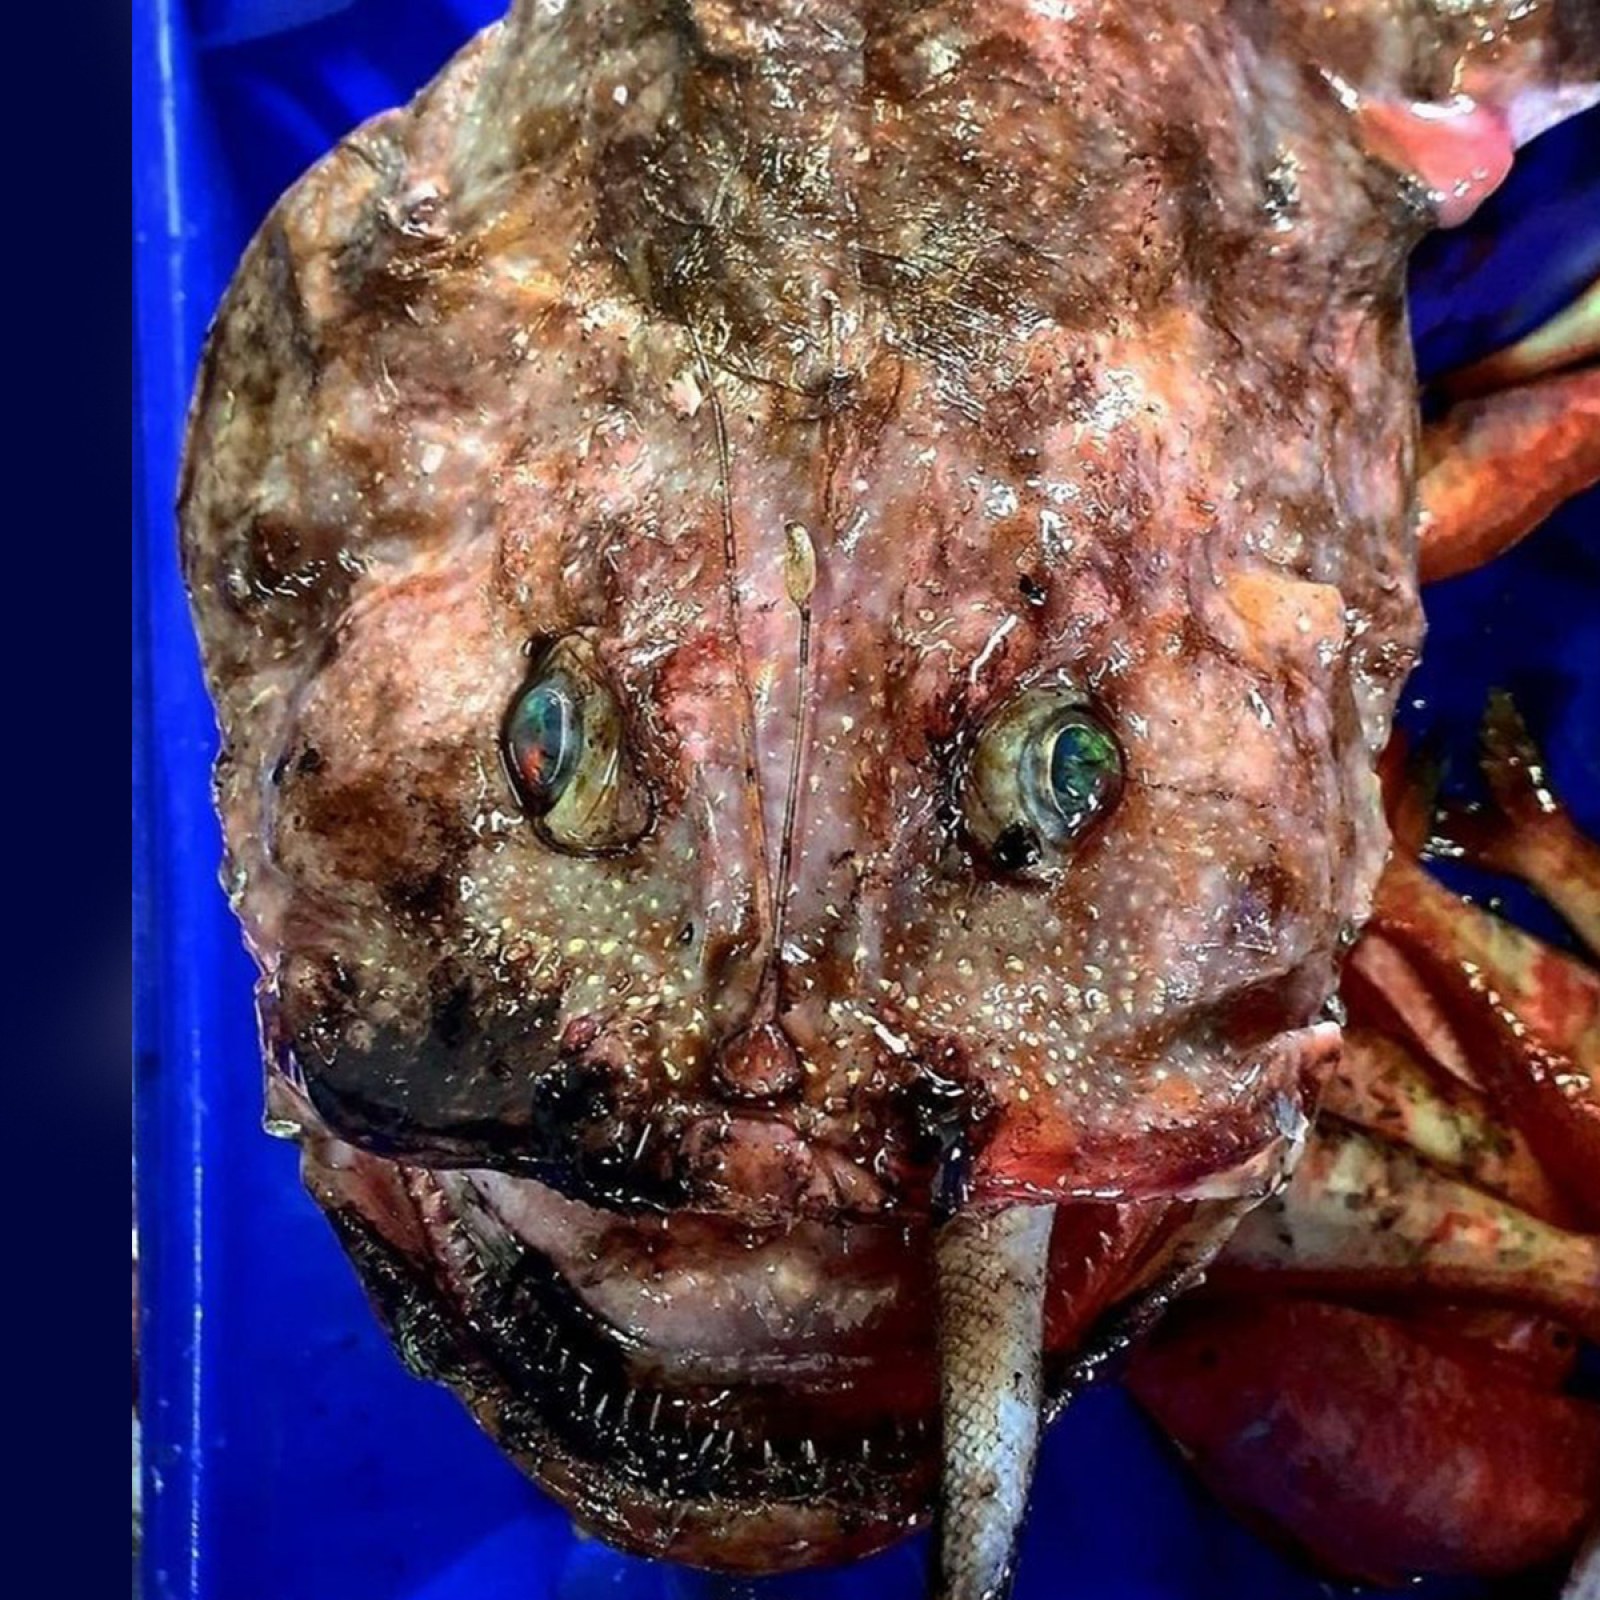 Sydney Fish expert reveals the ugly blobfish is edible and tasty